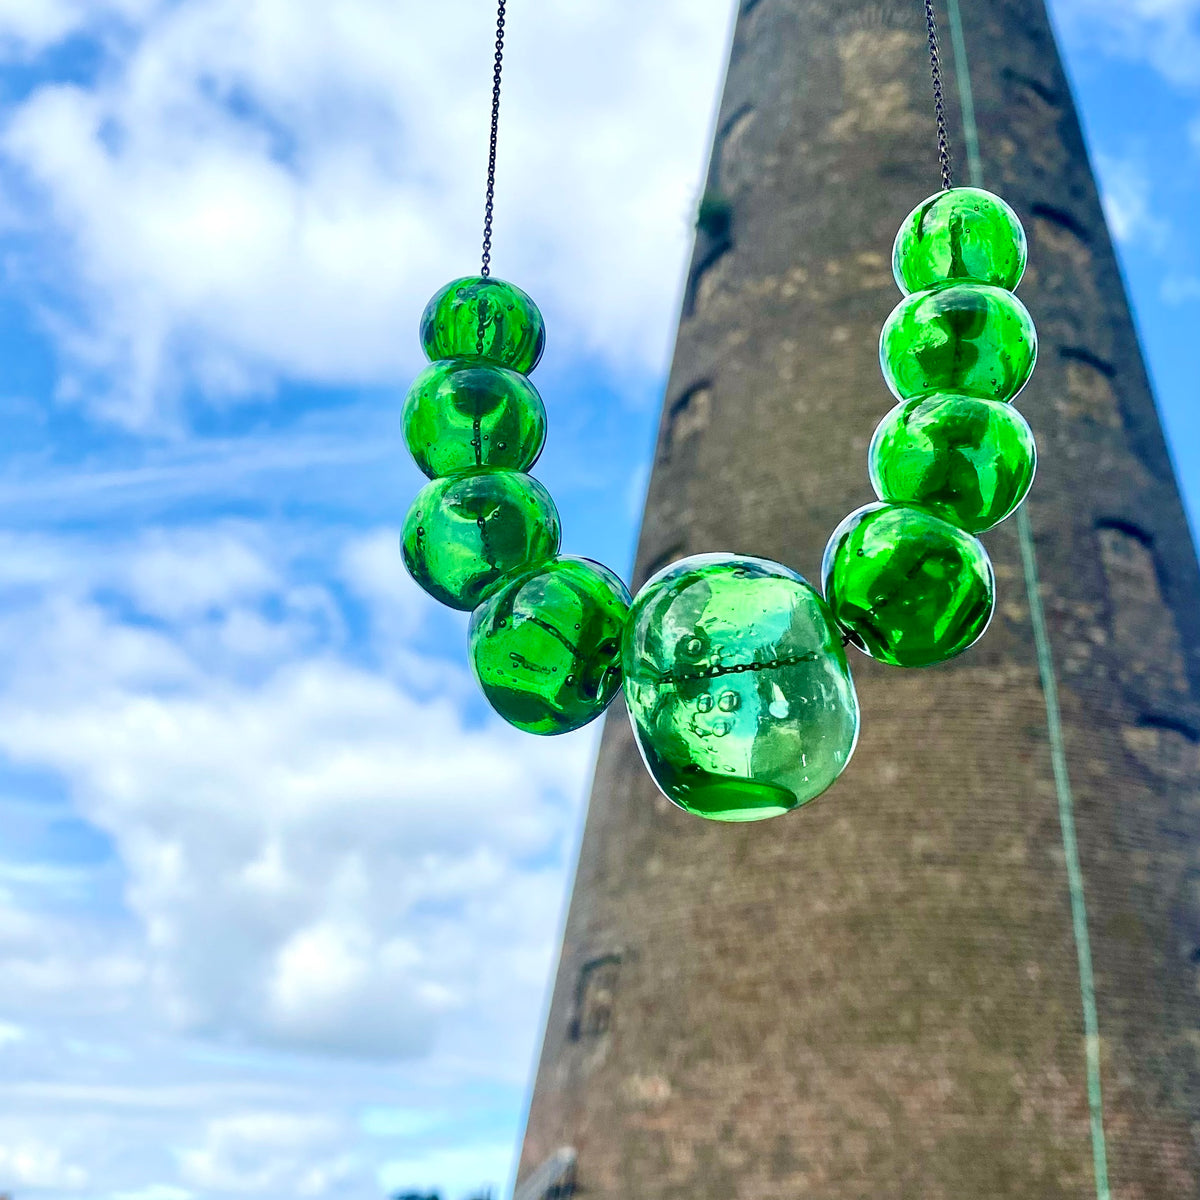 Recycled Glass Bottle Earrings: Everything you want to know!